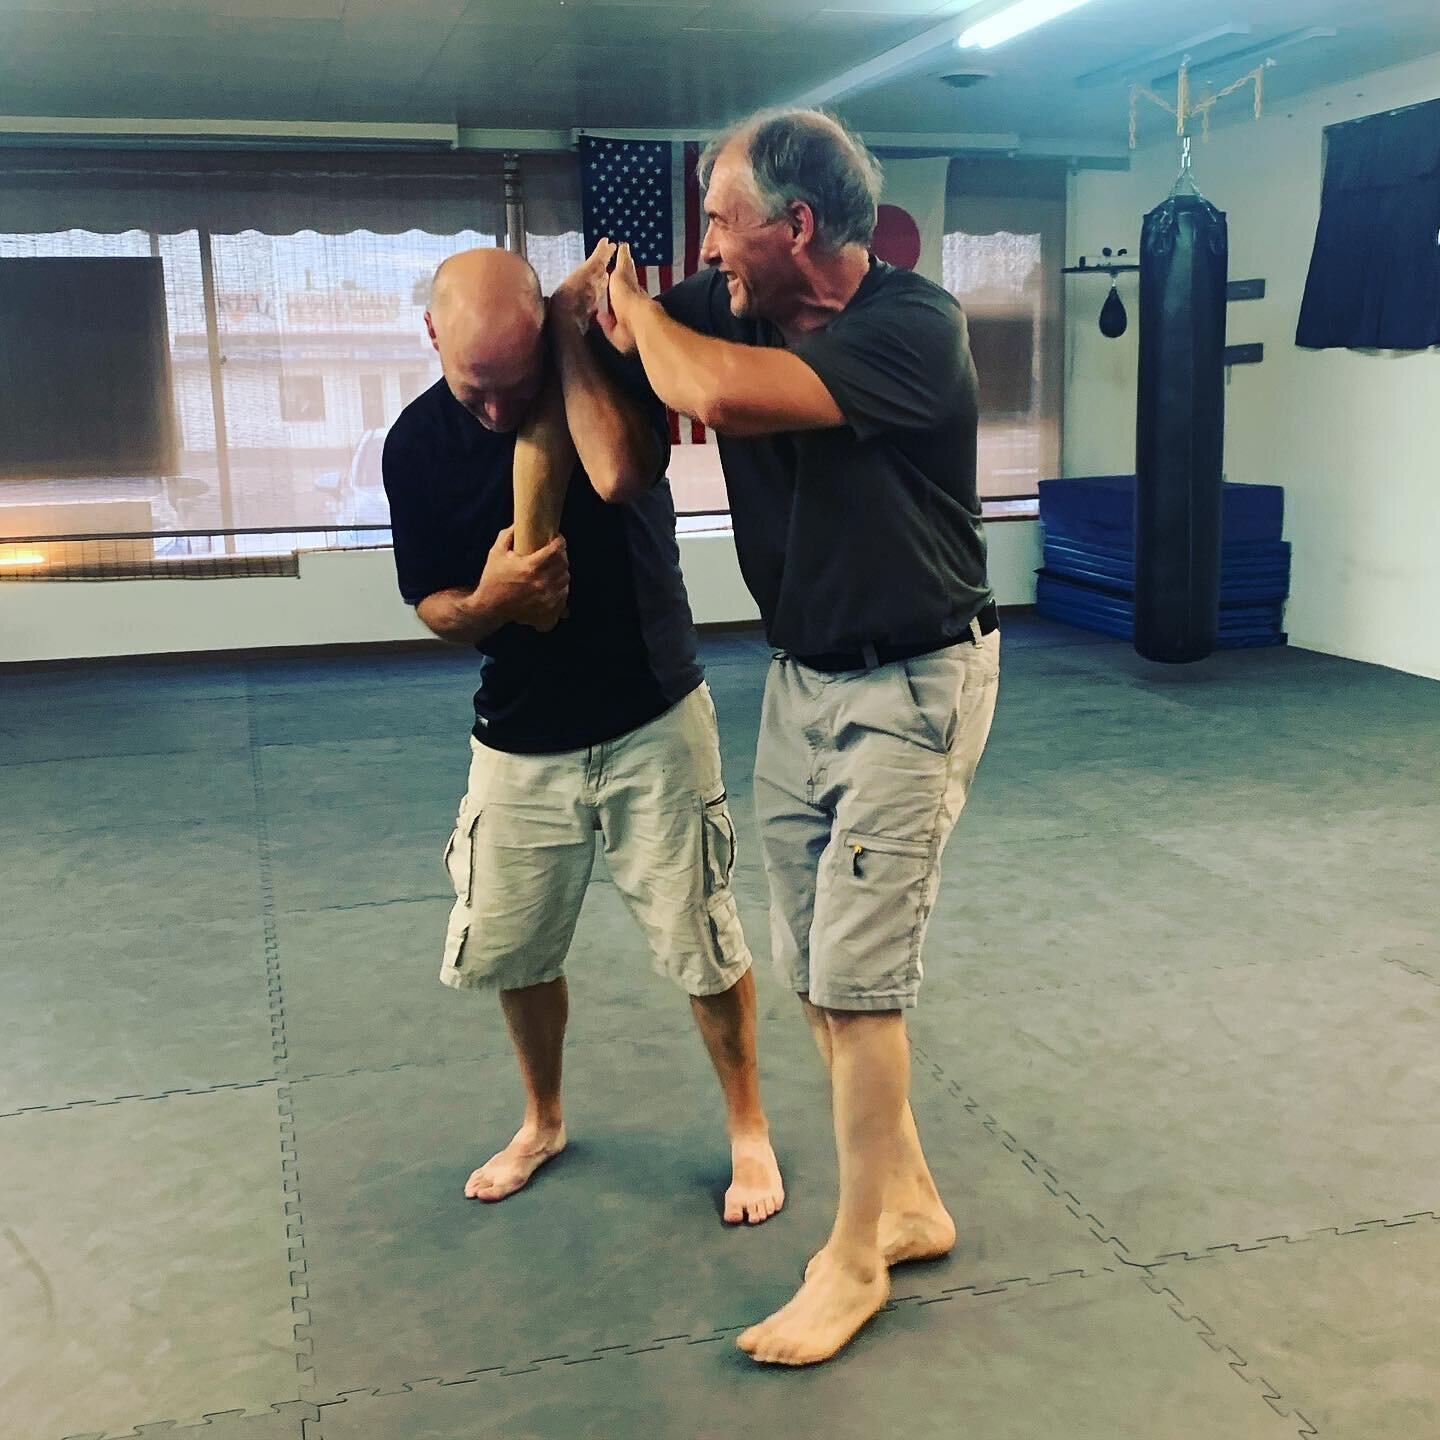 Working some joint lock flow drills for our Friday! 

Interested in our classes? Send us a DM or contact us at steelcityselfdefense@gmail.com! 🥊 

#steelcityselfdefense #pueblo #pueblocolorado #puebloshares #selfdefense #selfdefensepueblo #selfdefen